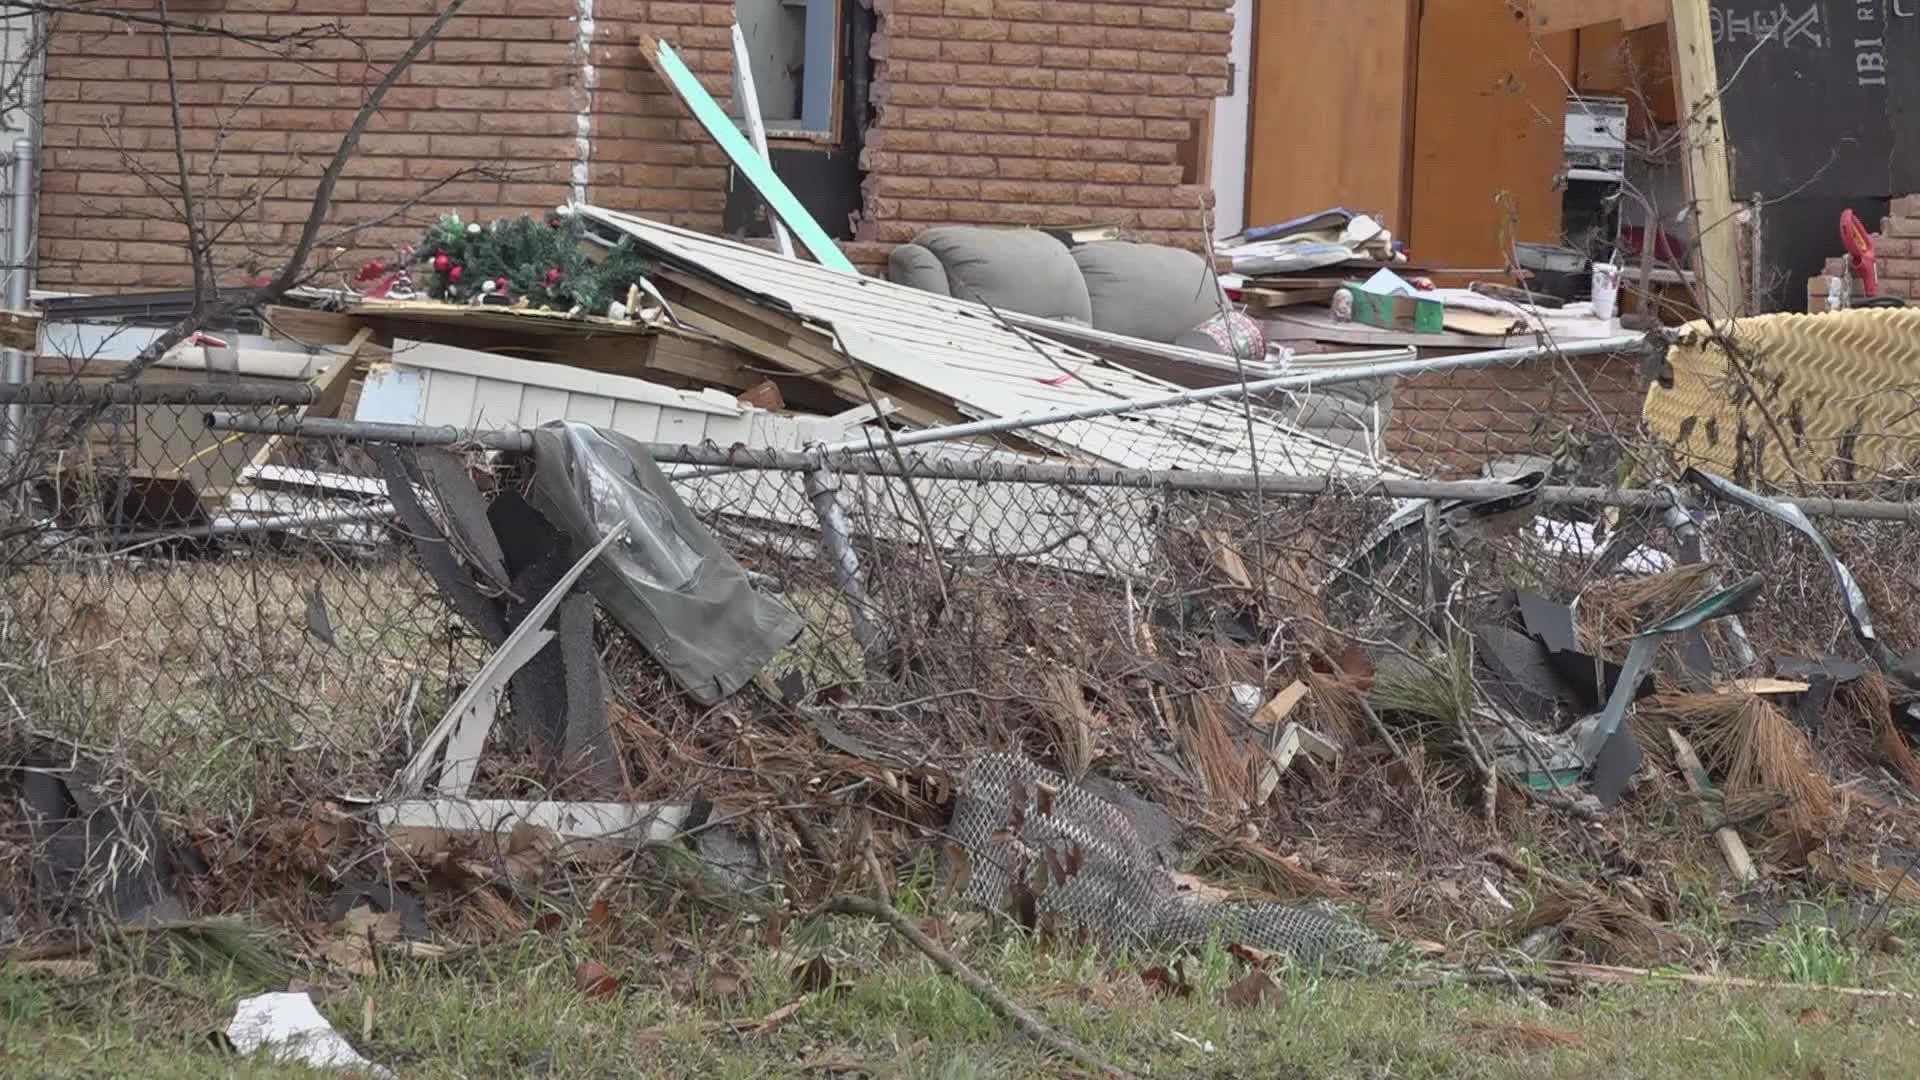 Chimento's family, along with other families in the neighborhood, were securing their tarps Monday as more strong storms with the risk of tornadoes could approach.